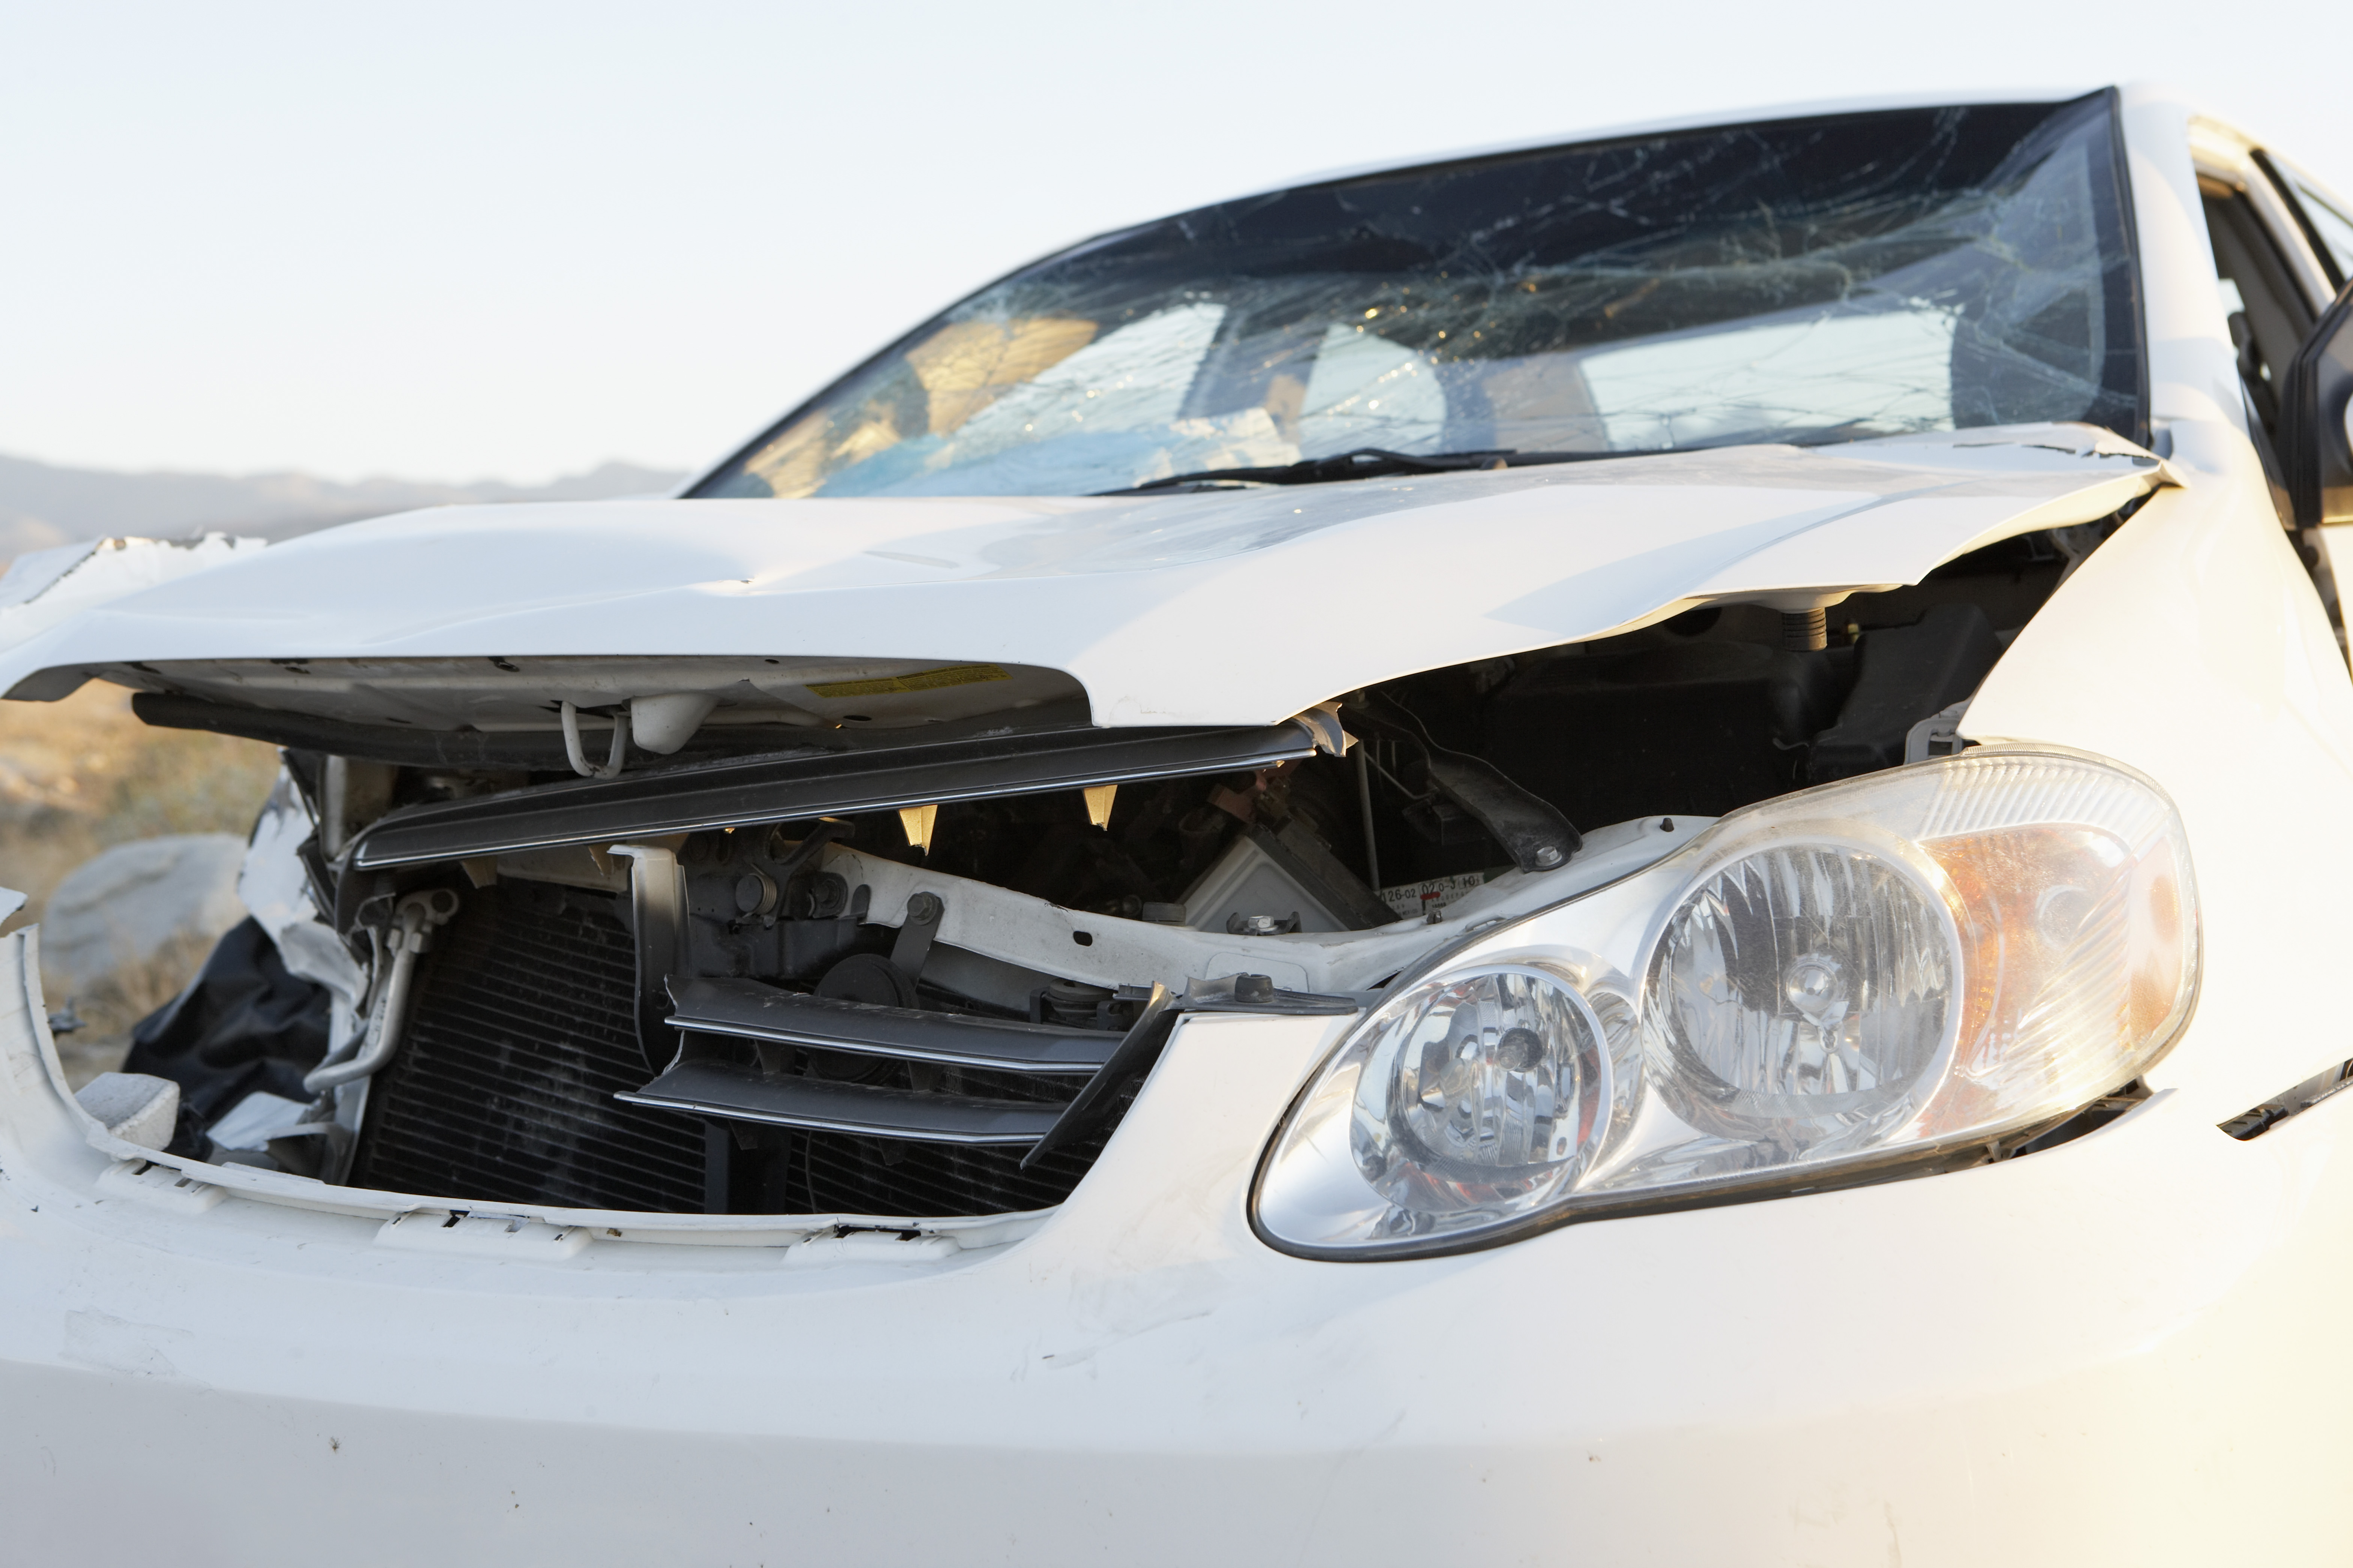 WILL AUTO INSURANCE COVER REPAIRS IF MY CAR BREAKS DOWN?